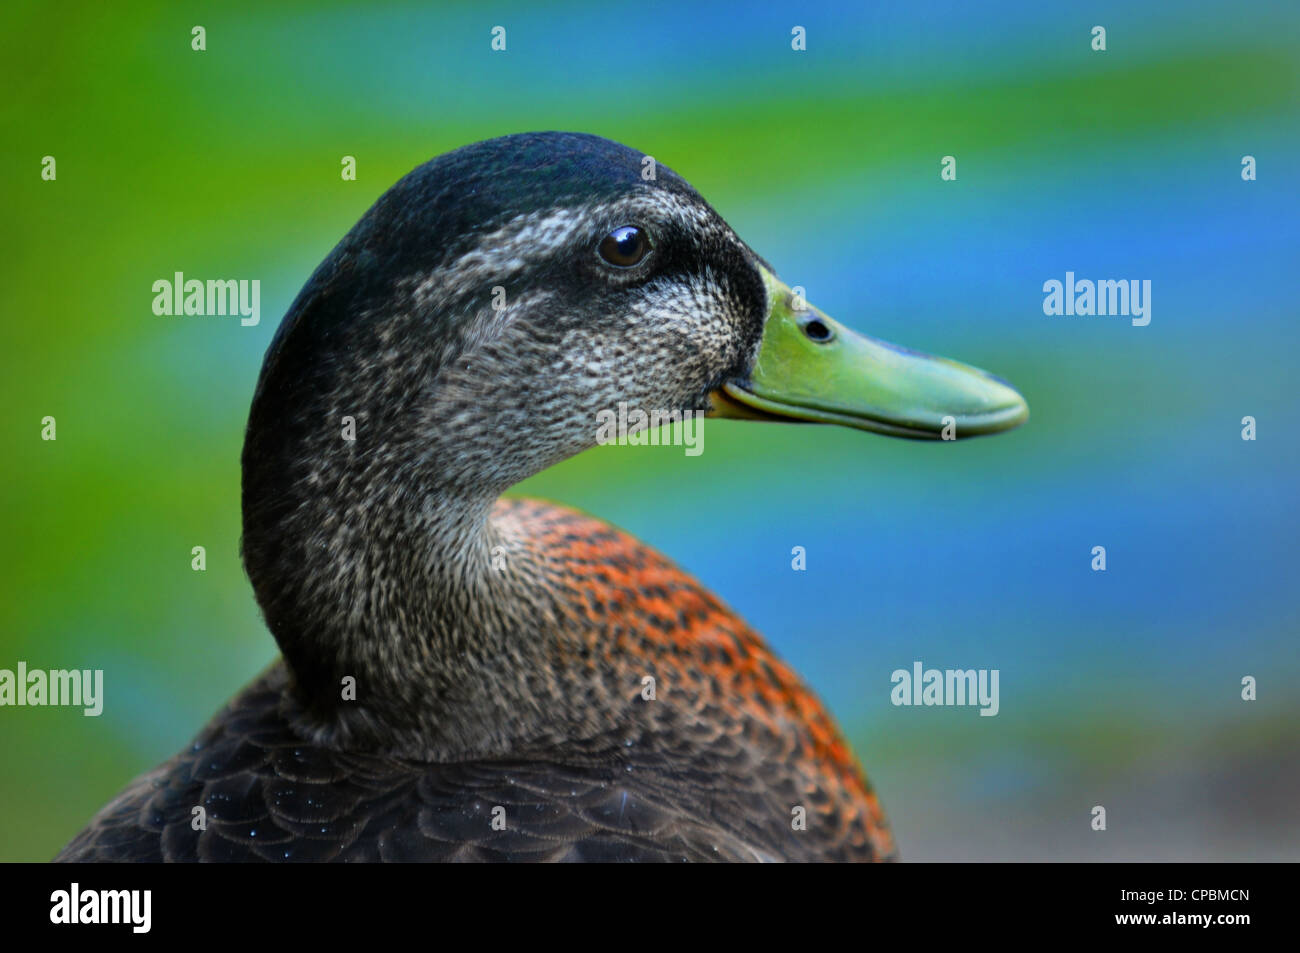 Portrait of wild duck with green and blue background of water Stock Photo